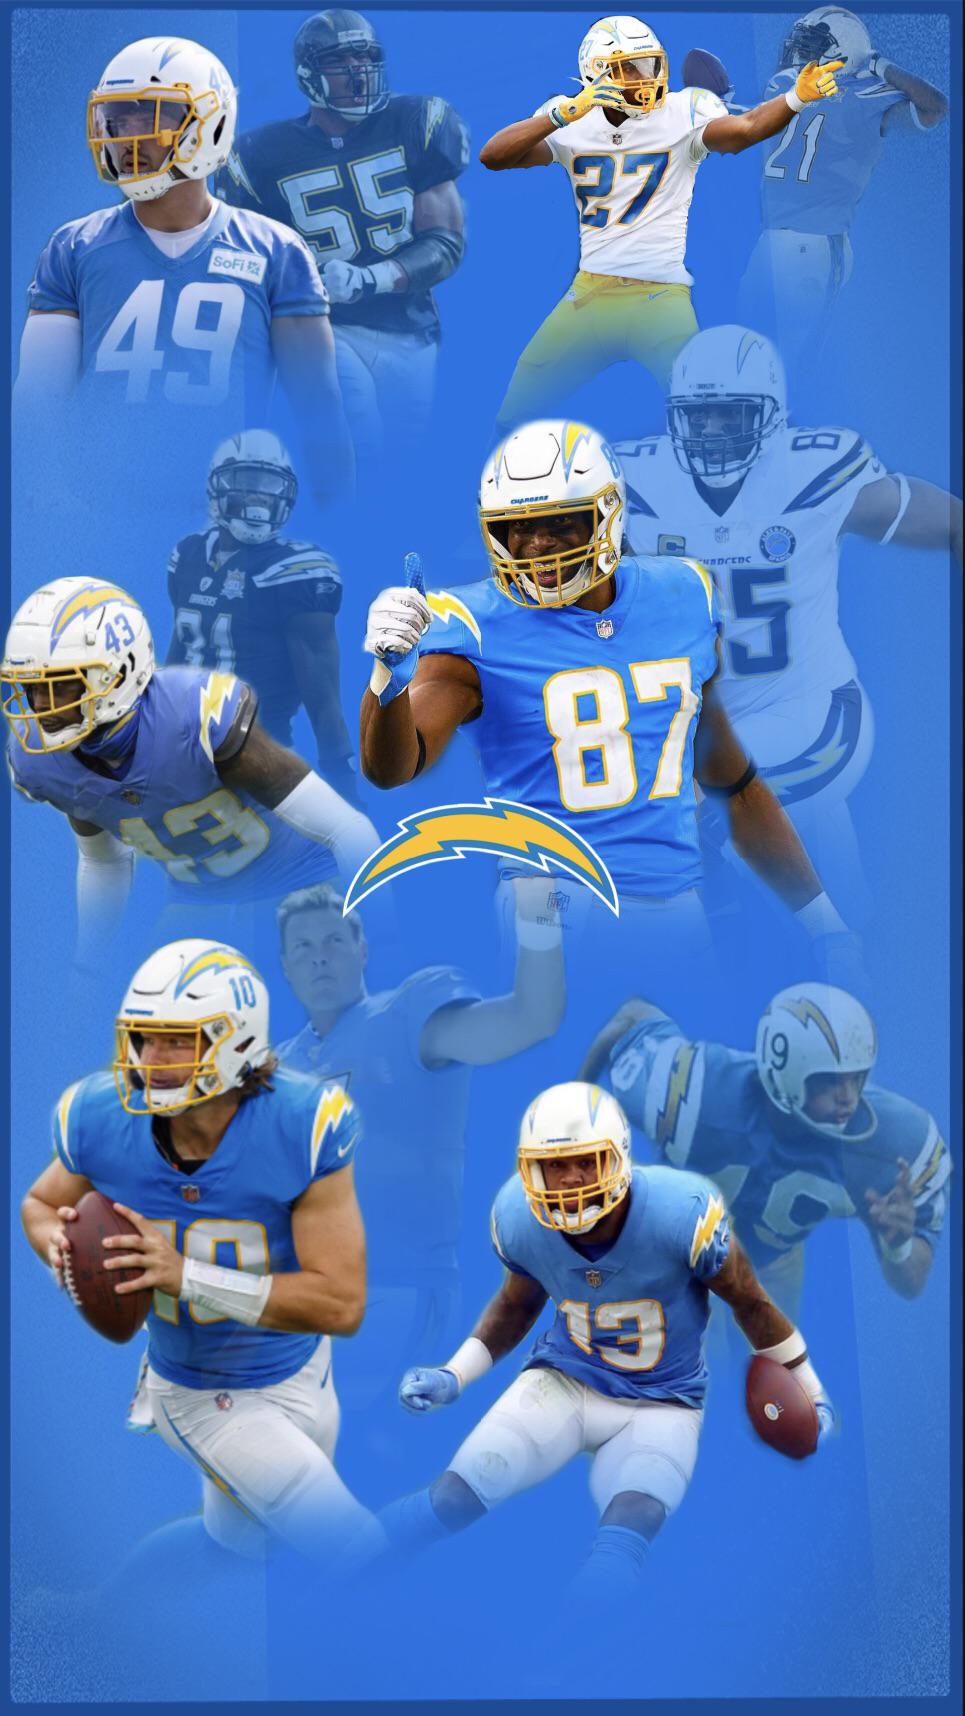 Made this past / present chargers wallpaper for my iPhone